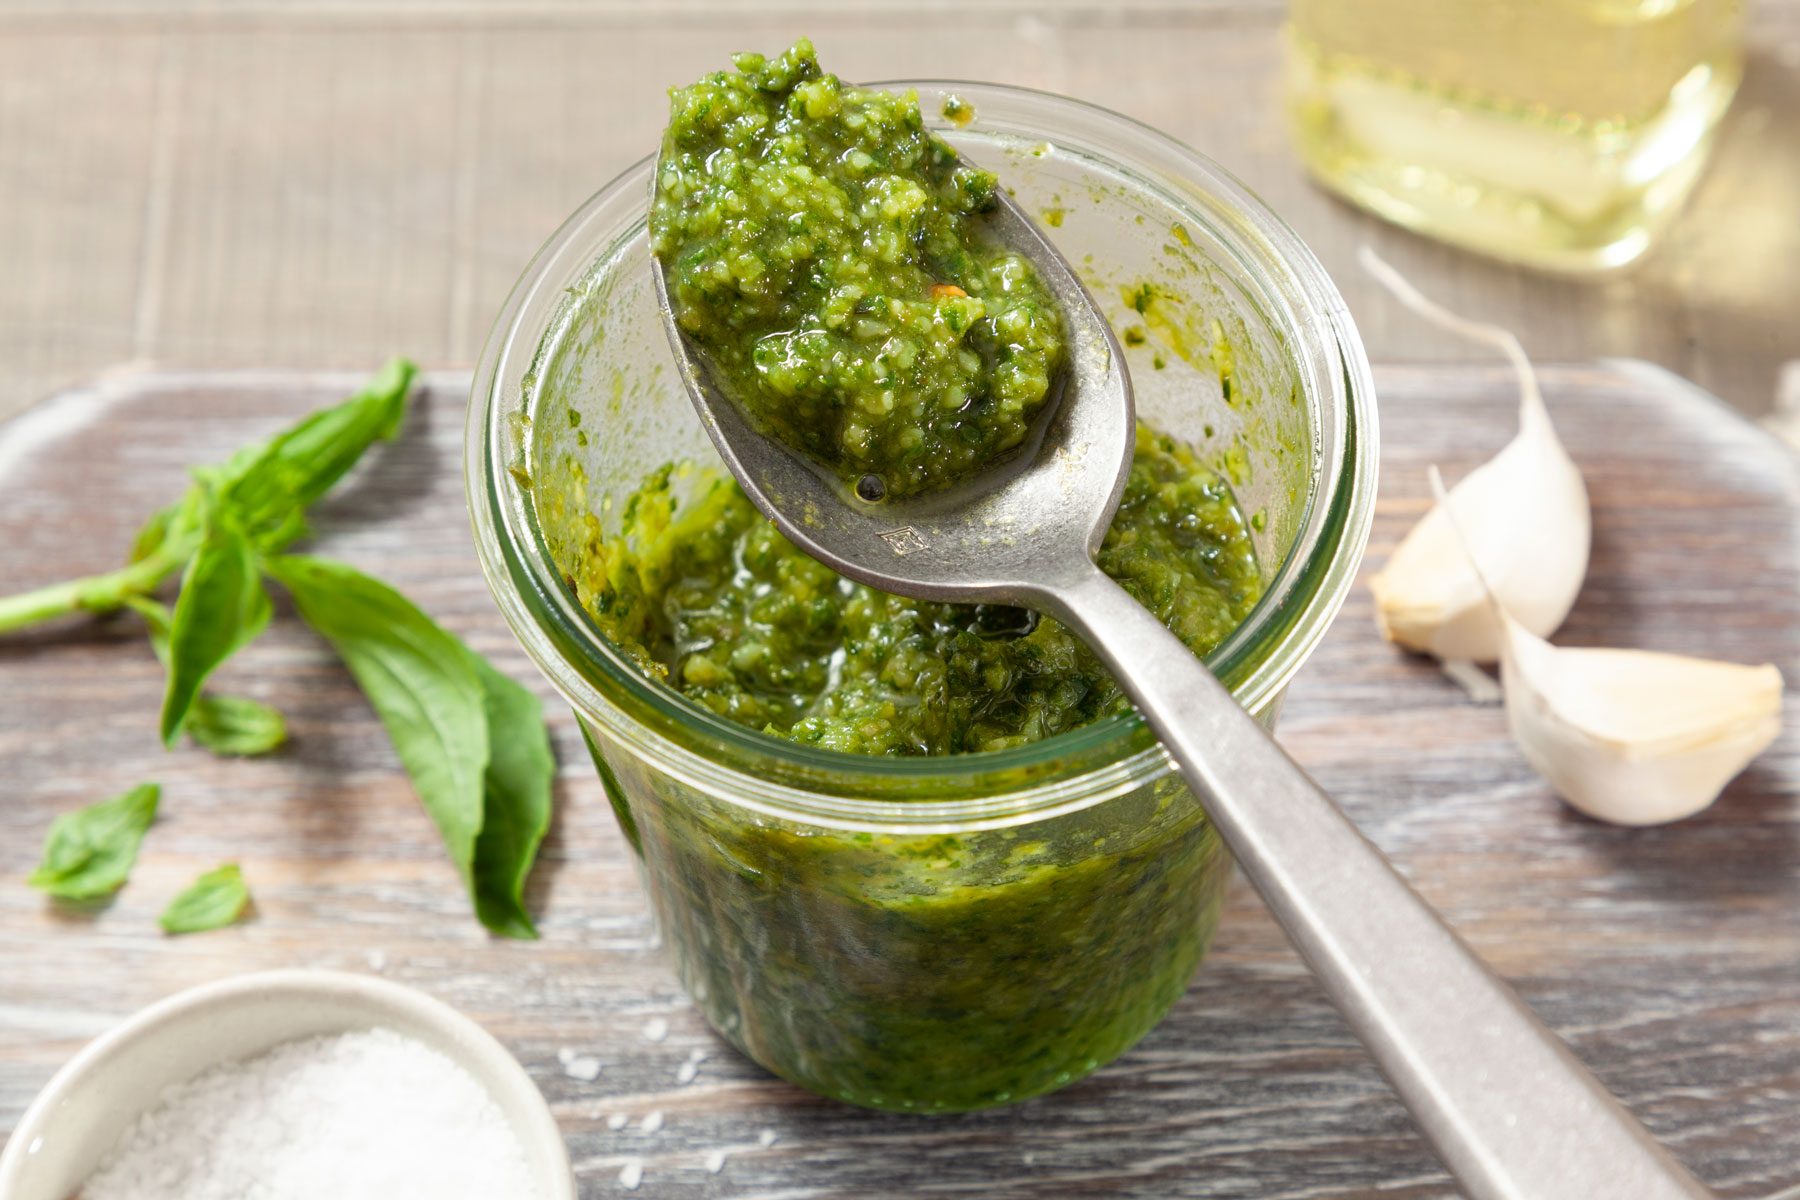 Classic Pesto in a small jar on a wooden surface